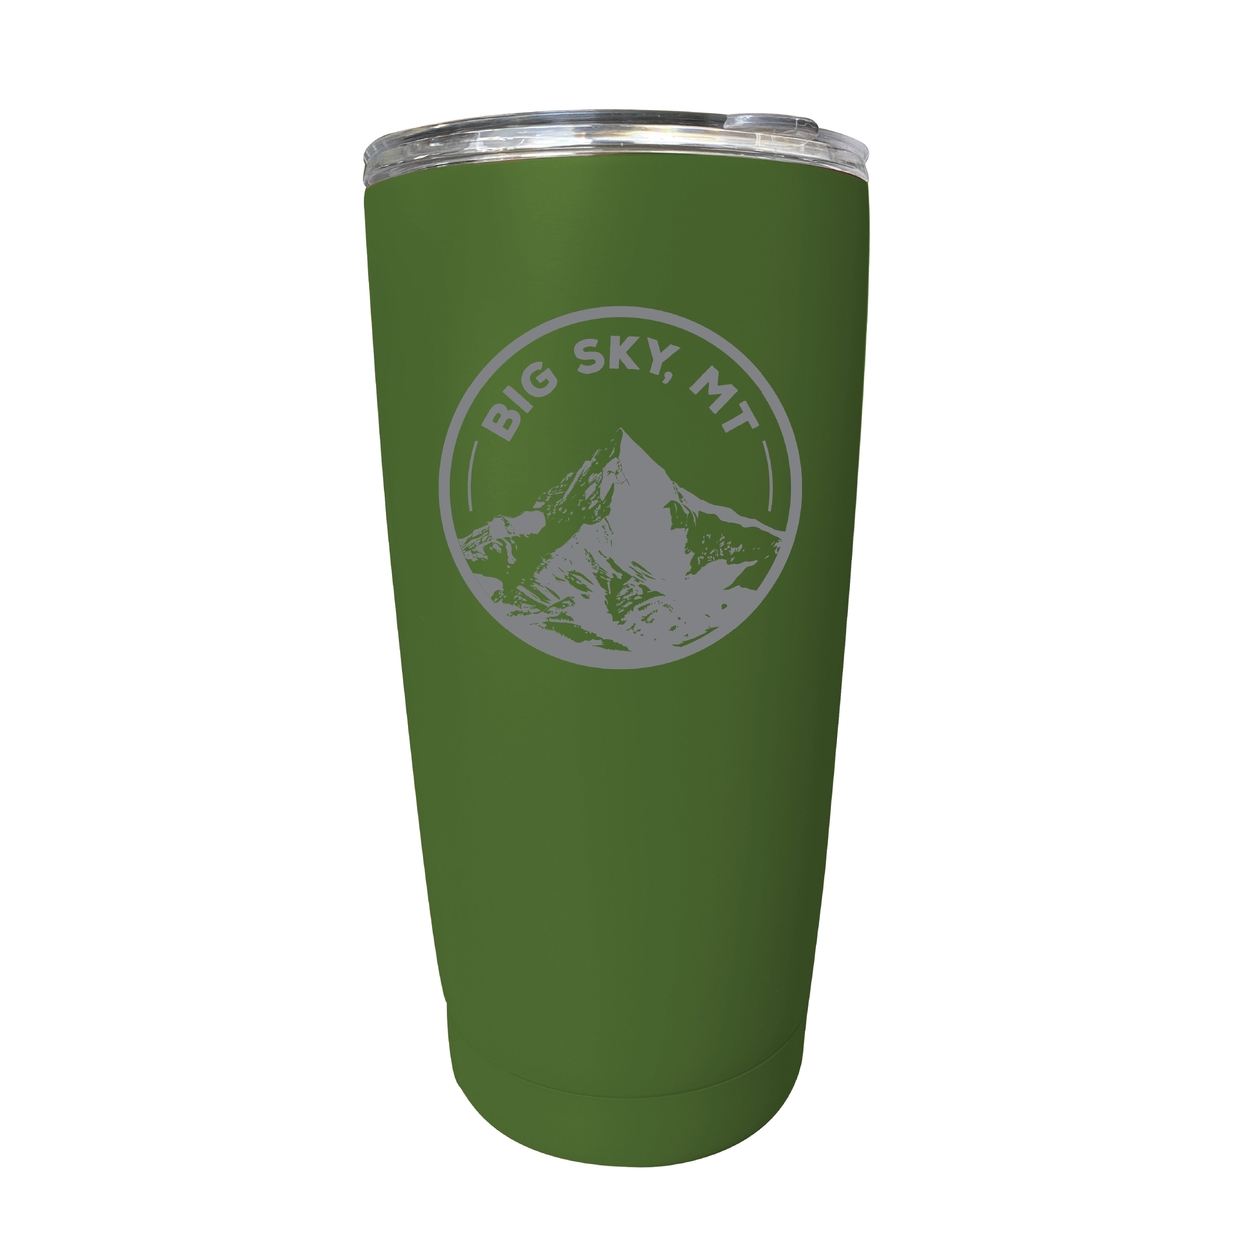 Big Sky Montana Souvenir 16 Oz Engraved Stainless Steel Insulated Tumbler - Green,,2-Pack